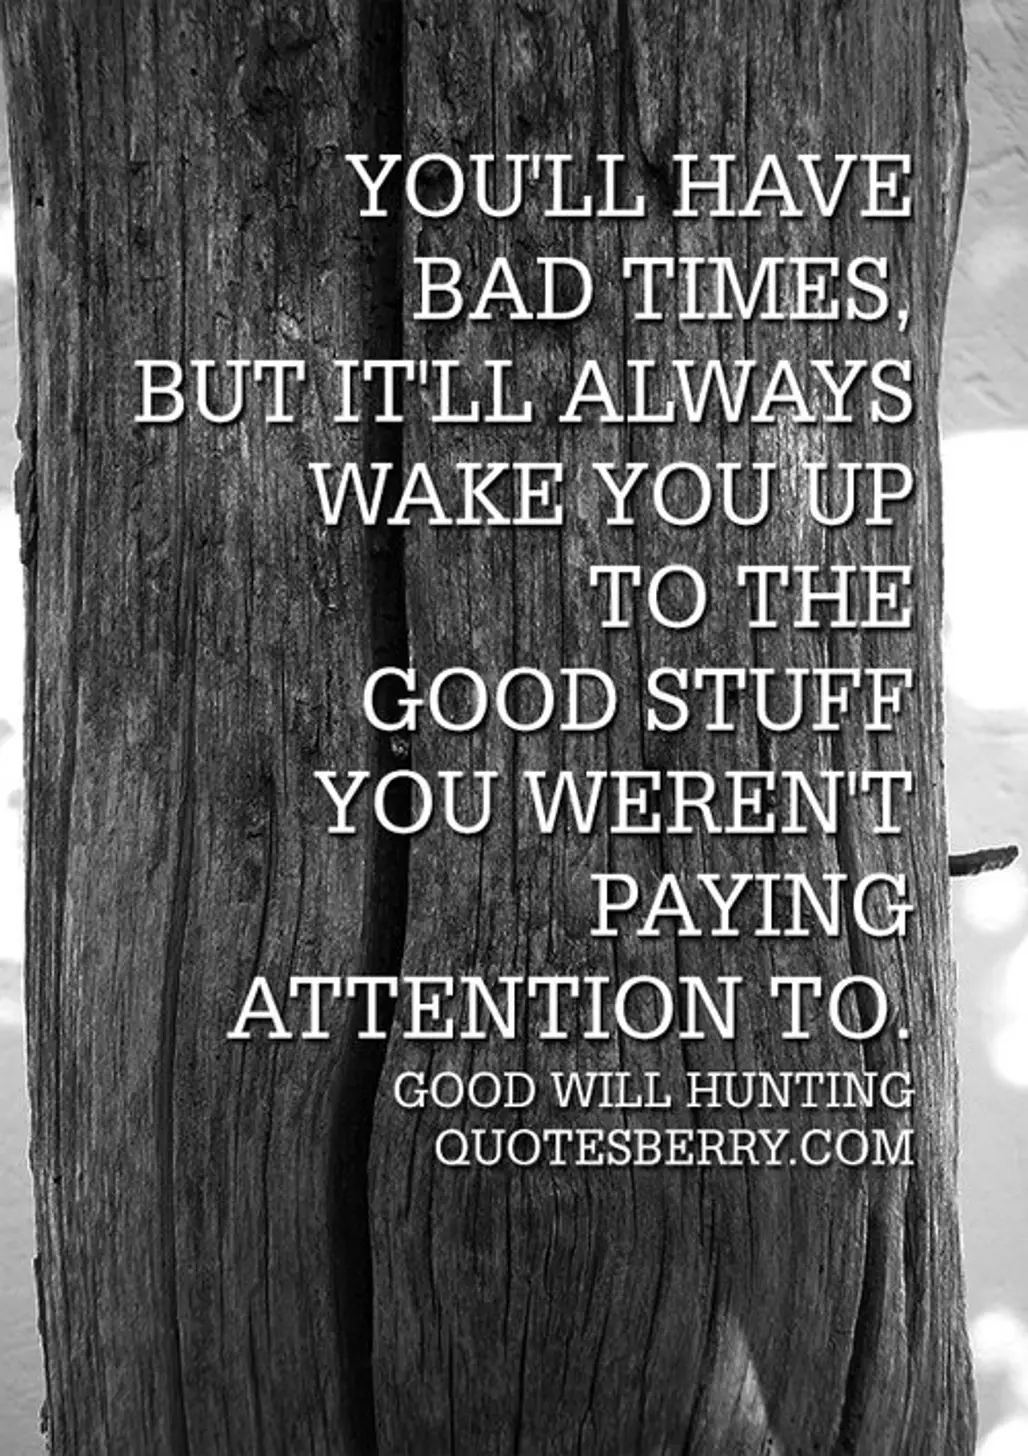 “You’ll Have Bad Times, but It’ll Always Wake You up to the Good Stuff You Weren’t Paying Attention to.”